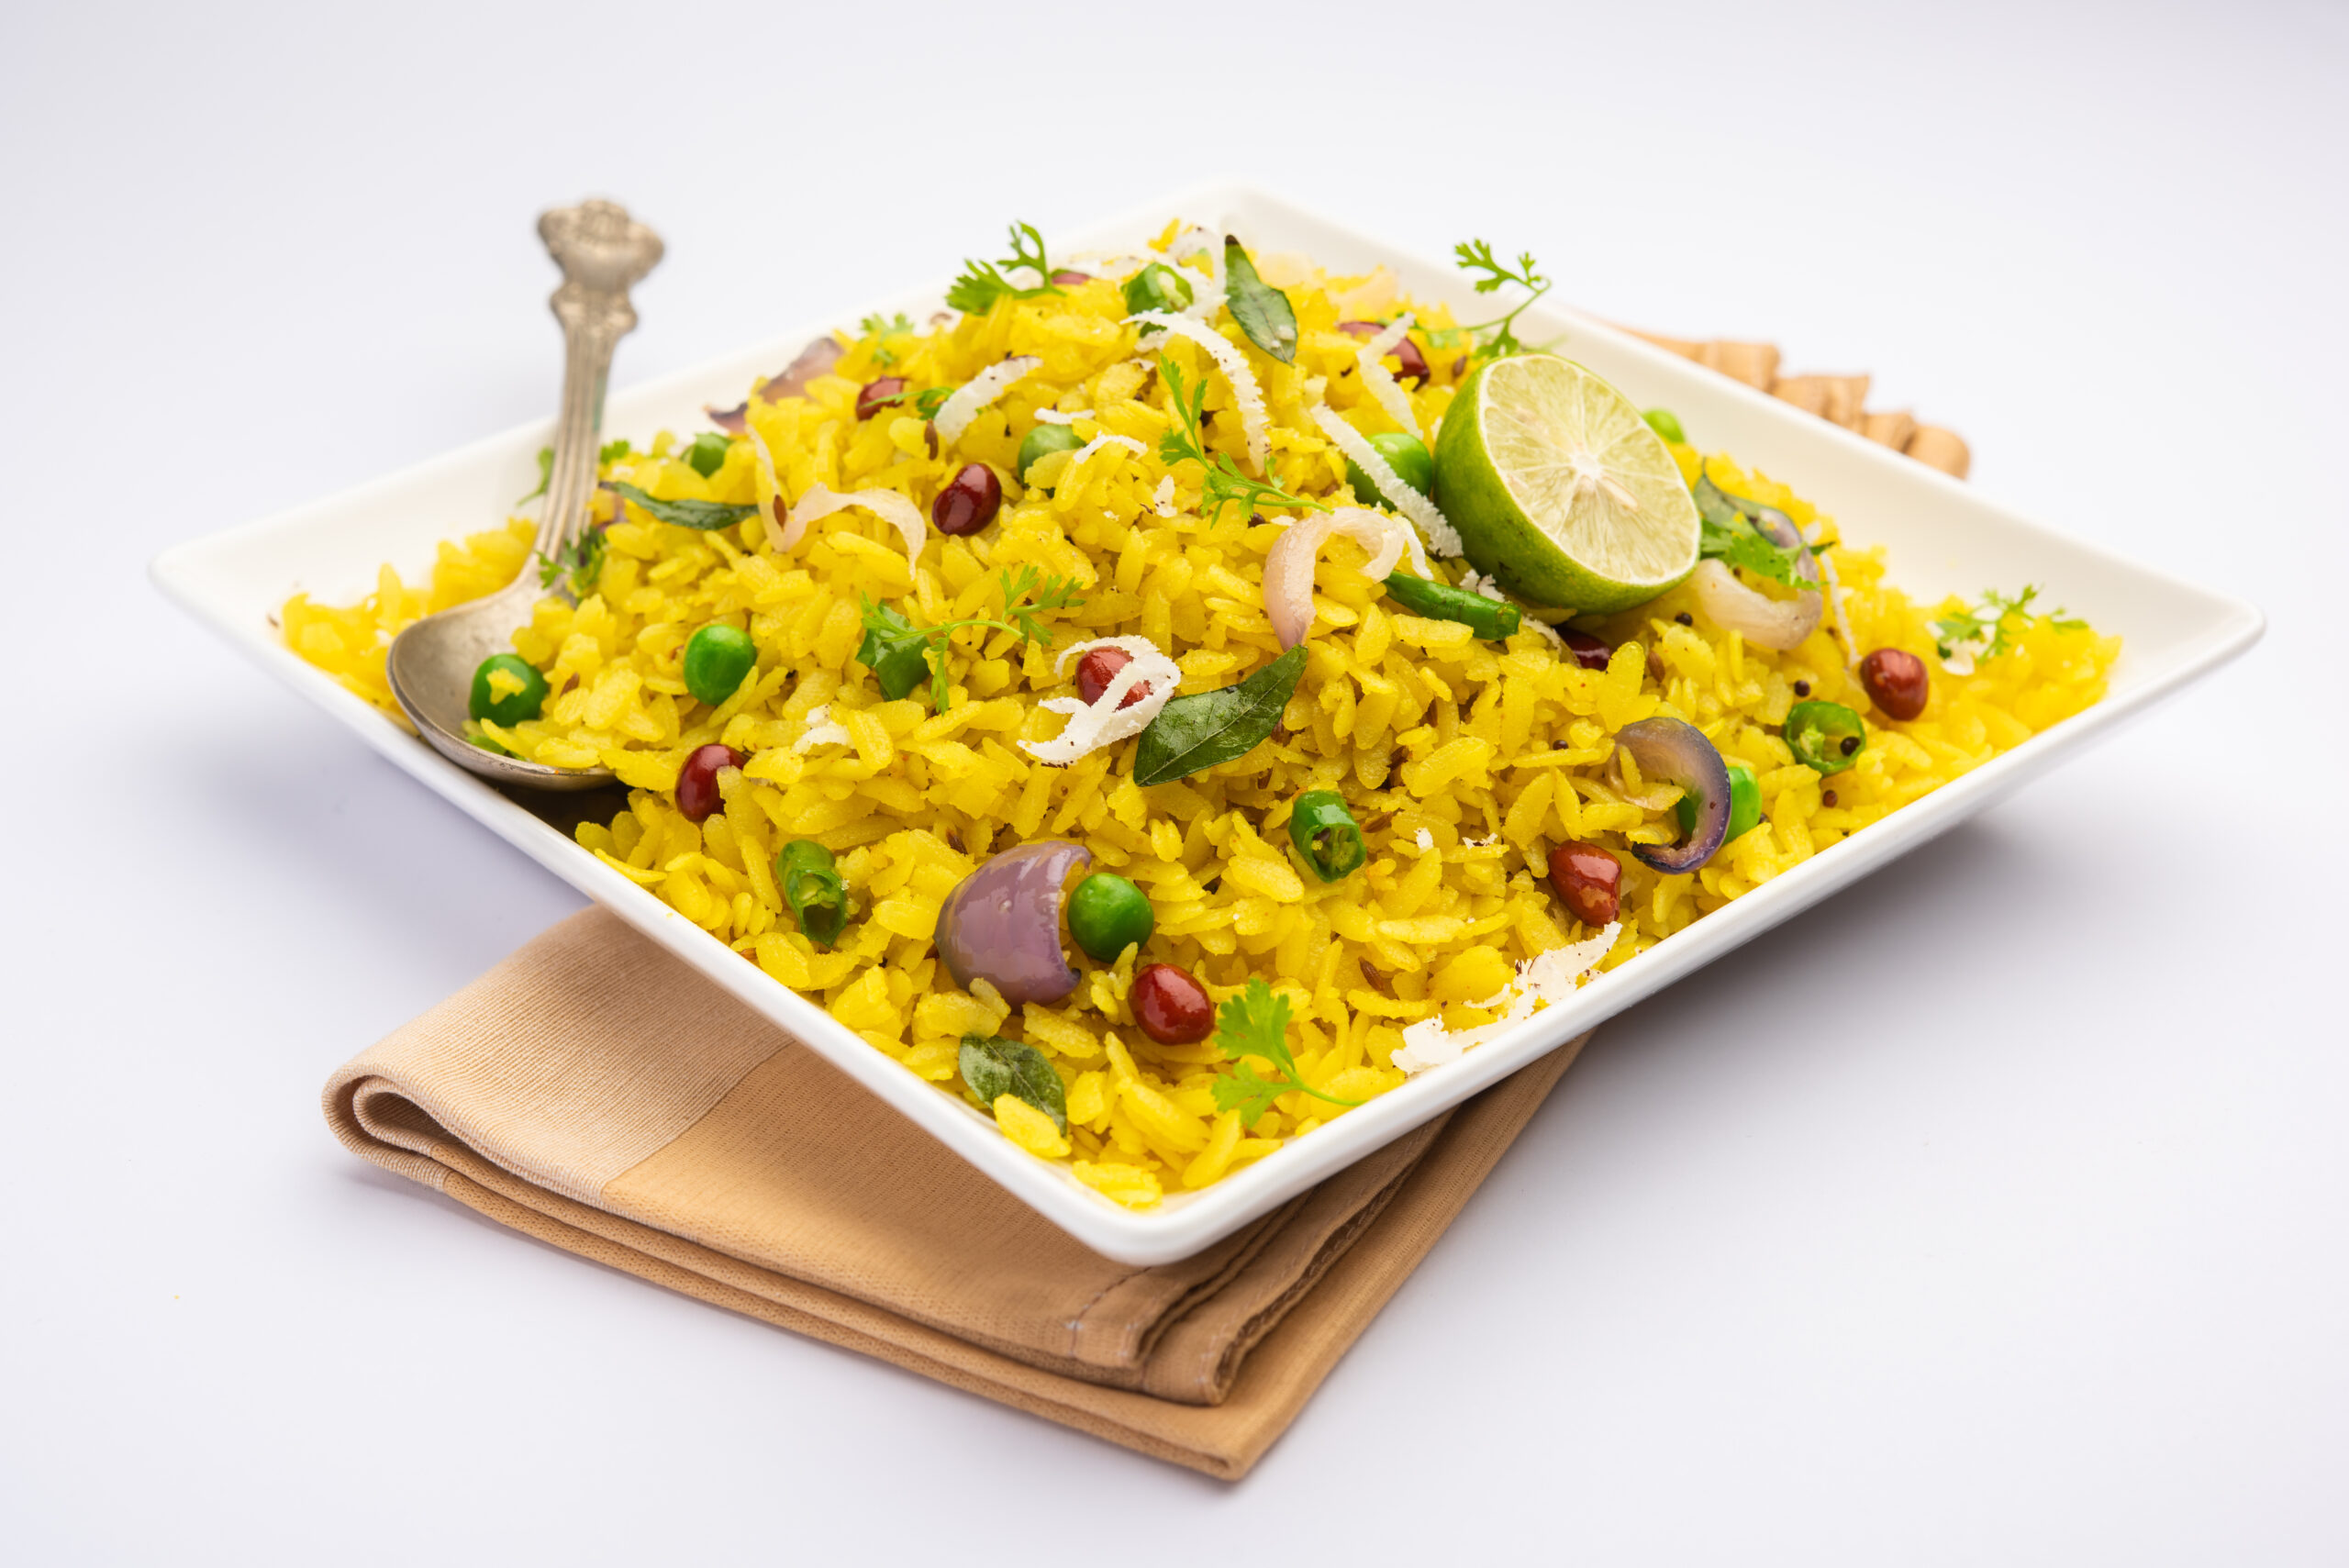 Poha Ingredients: Add Flavour to Poha